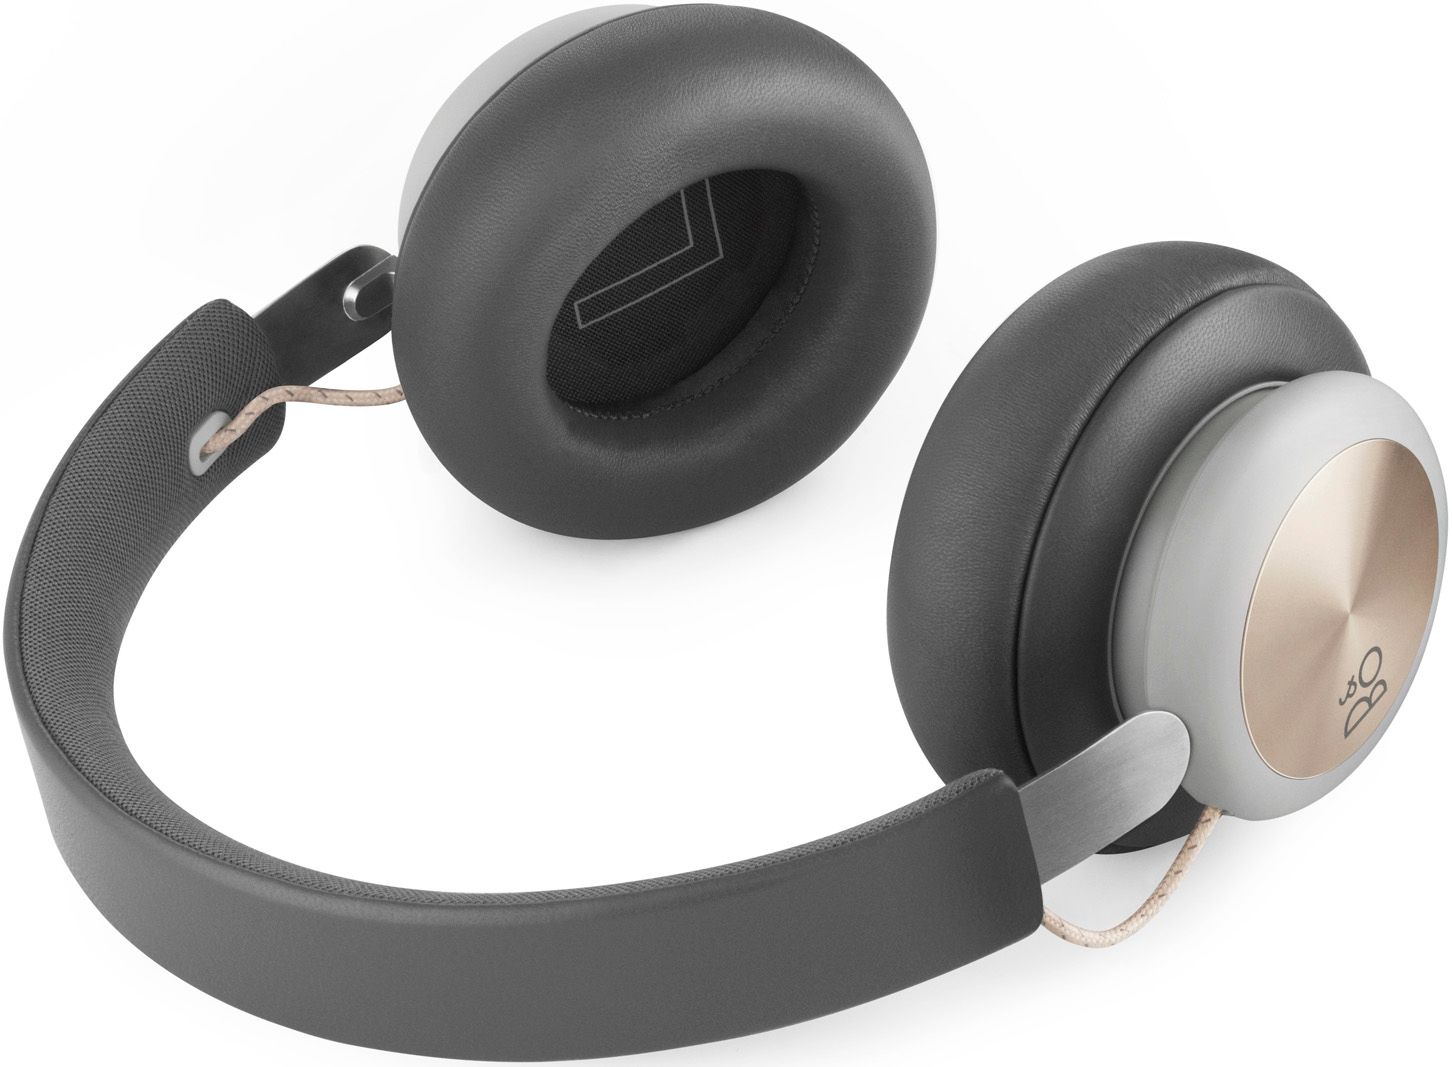 b o play wireless beoplay h4 headphones come with apple watch control image 2